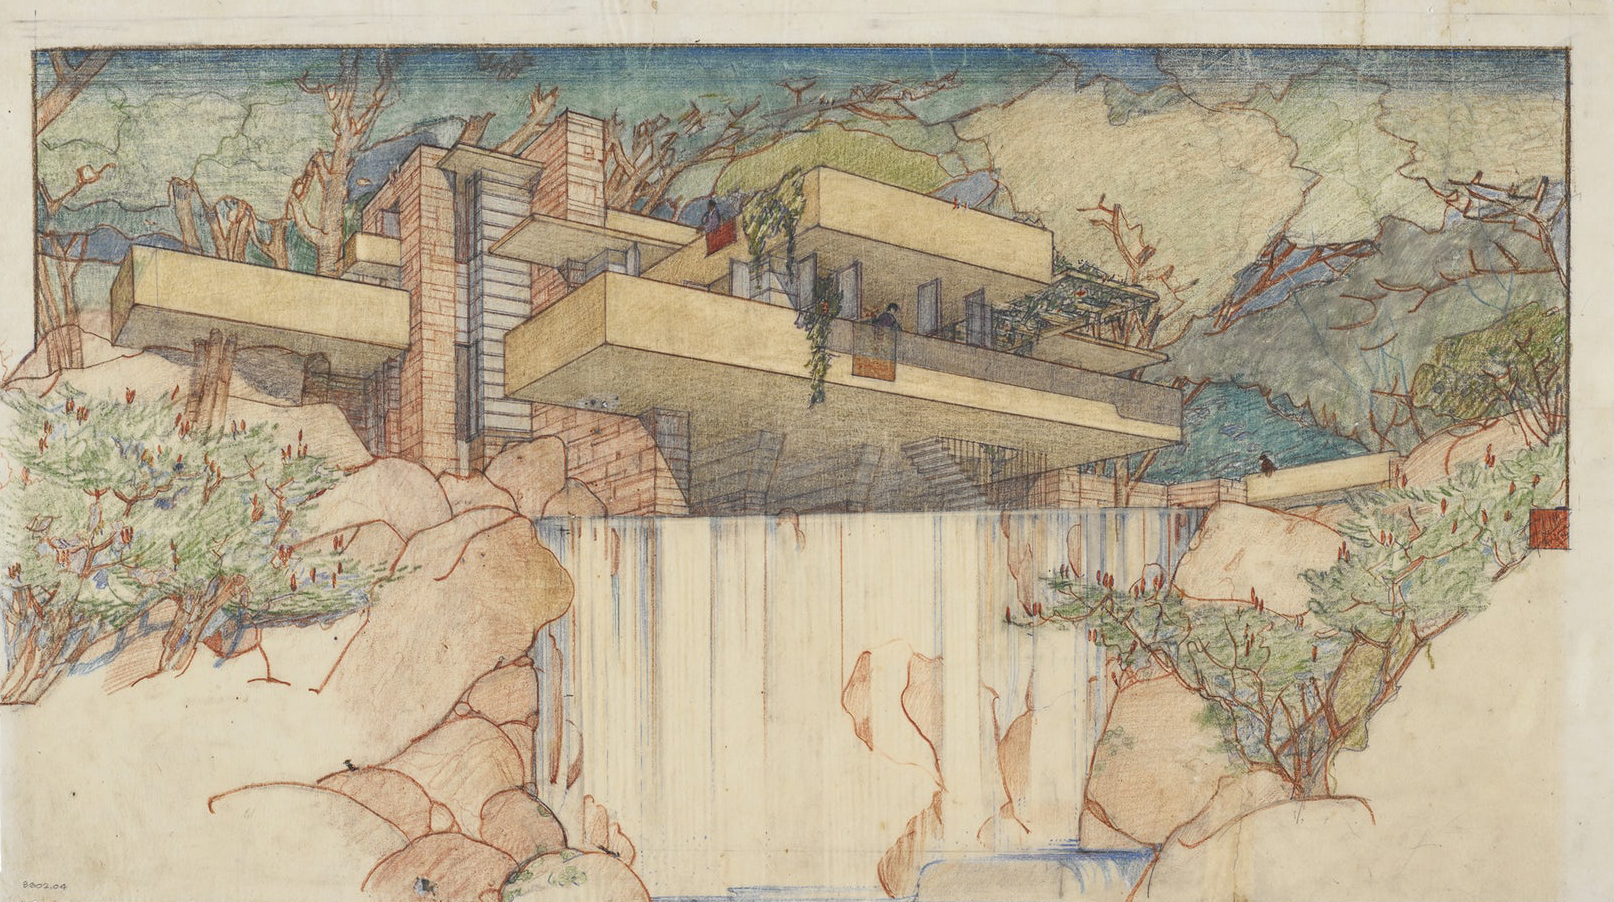 World Heritage Posters Celebrate Wright Inscription through Artistss  Drawings  Frank Lloyd Wright Foundation